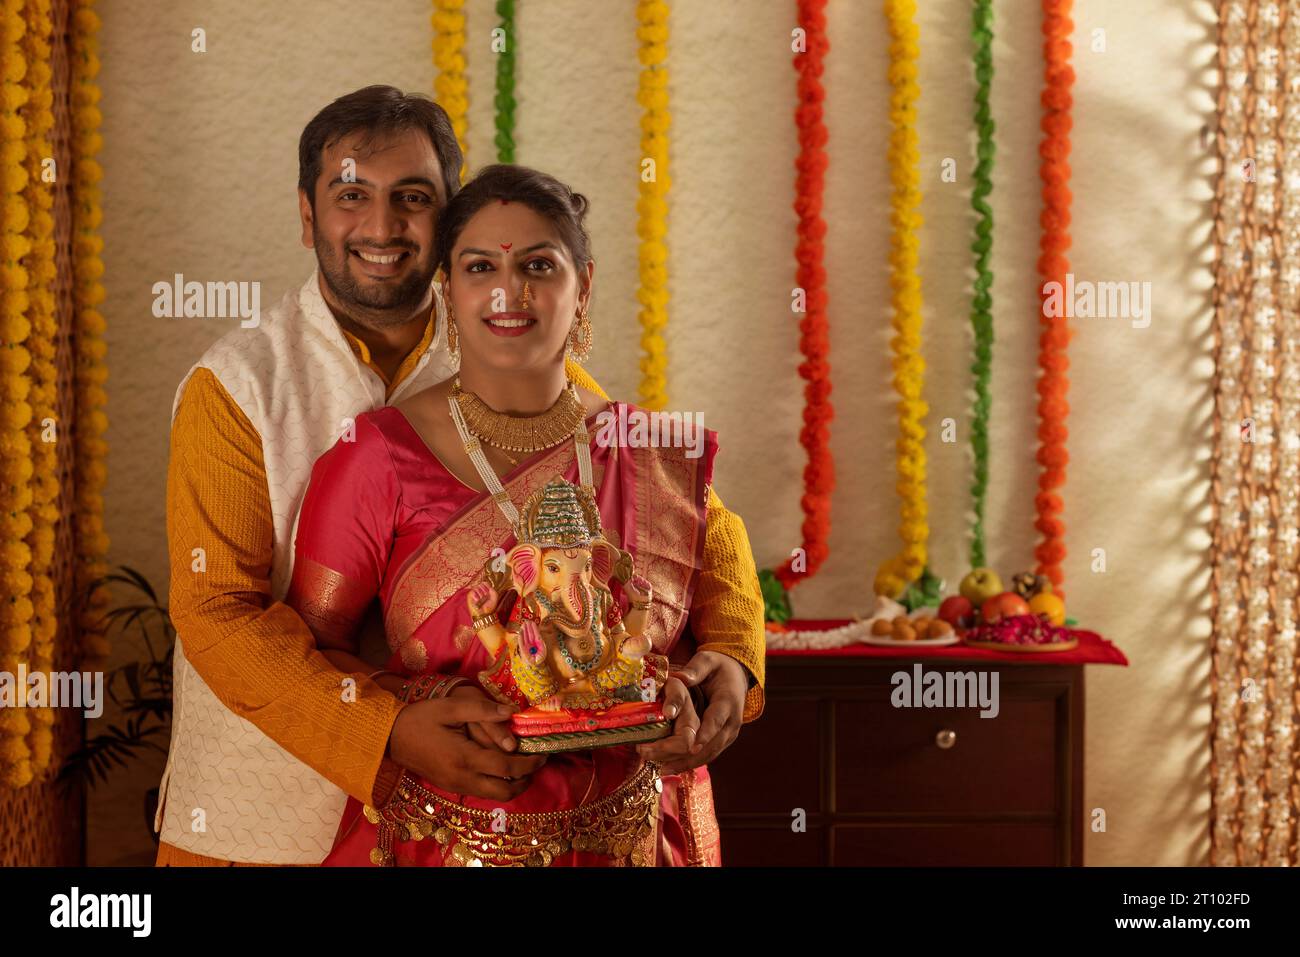 Portrait of happy young couple holding an idol of Lord Ganesha Stock Photo